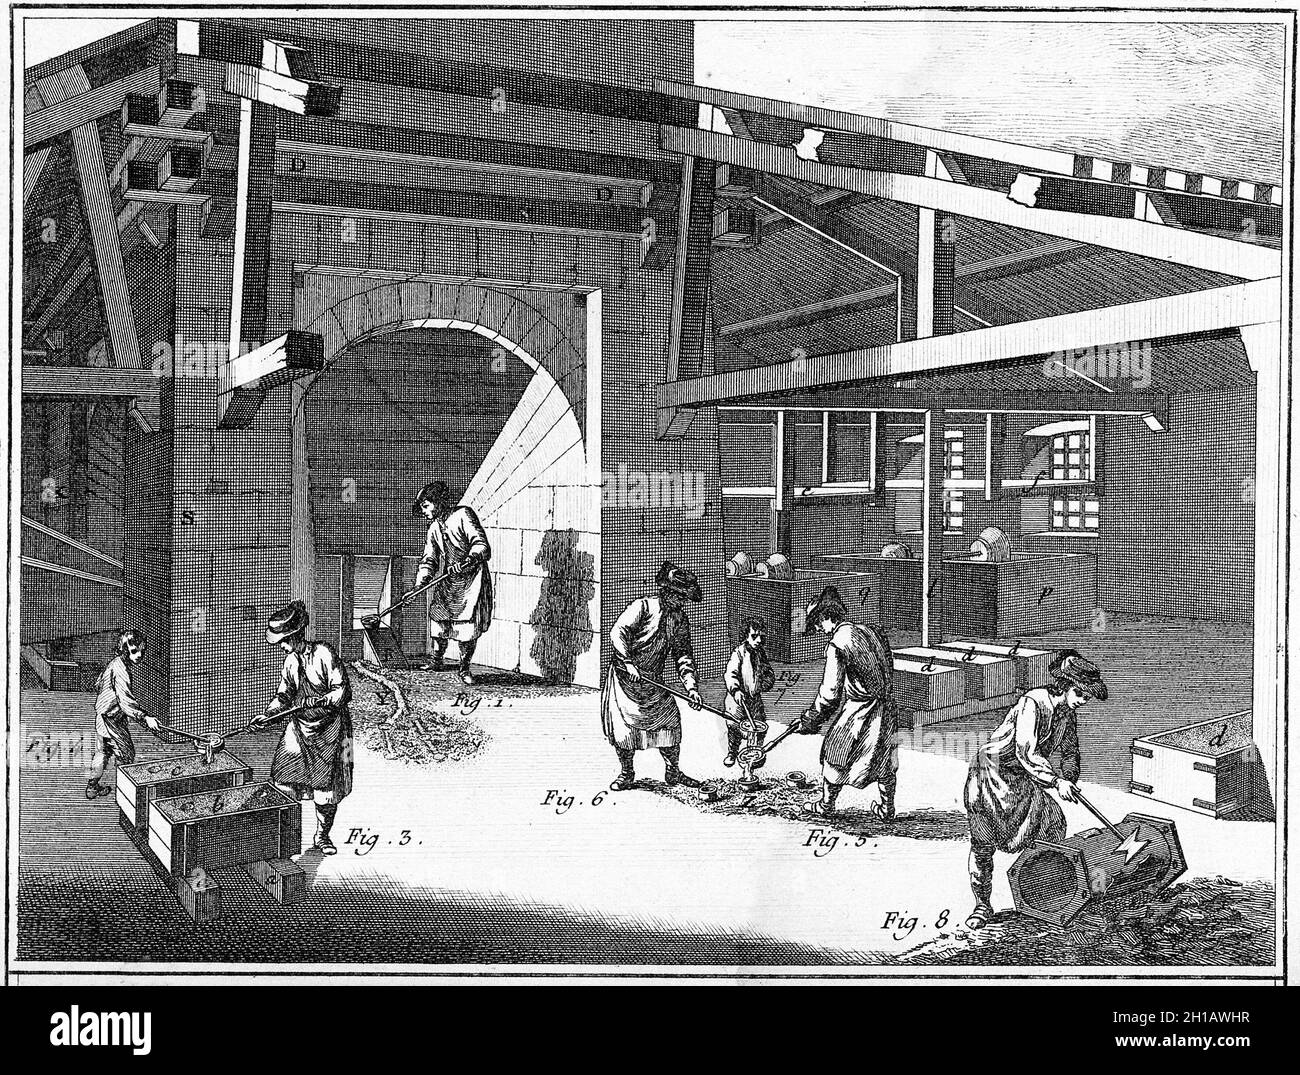 Engraving of people making iron at a foundry, circa 1800. Stock Photo